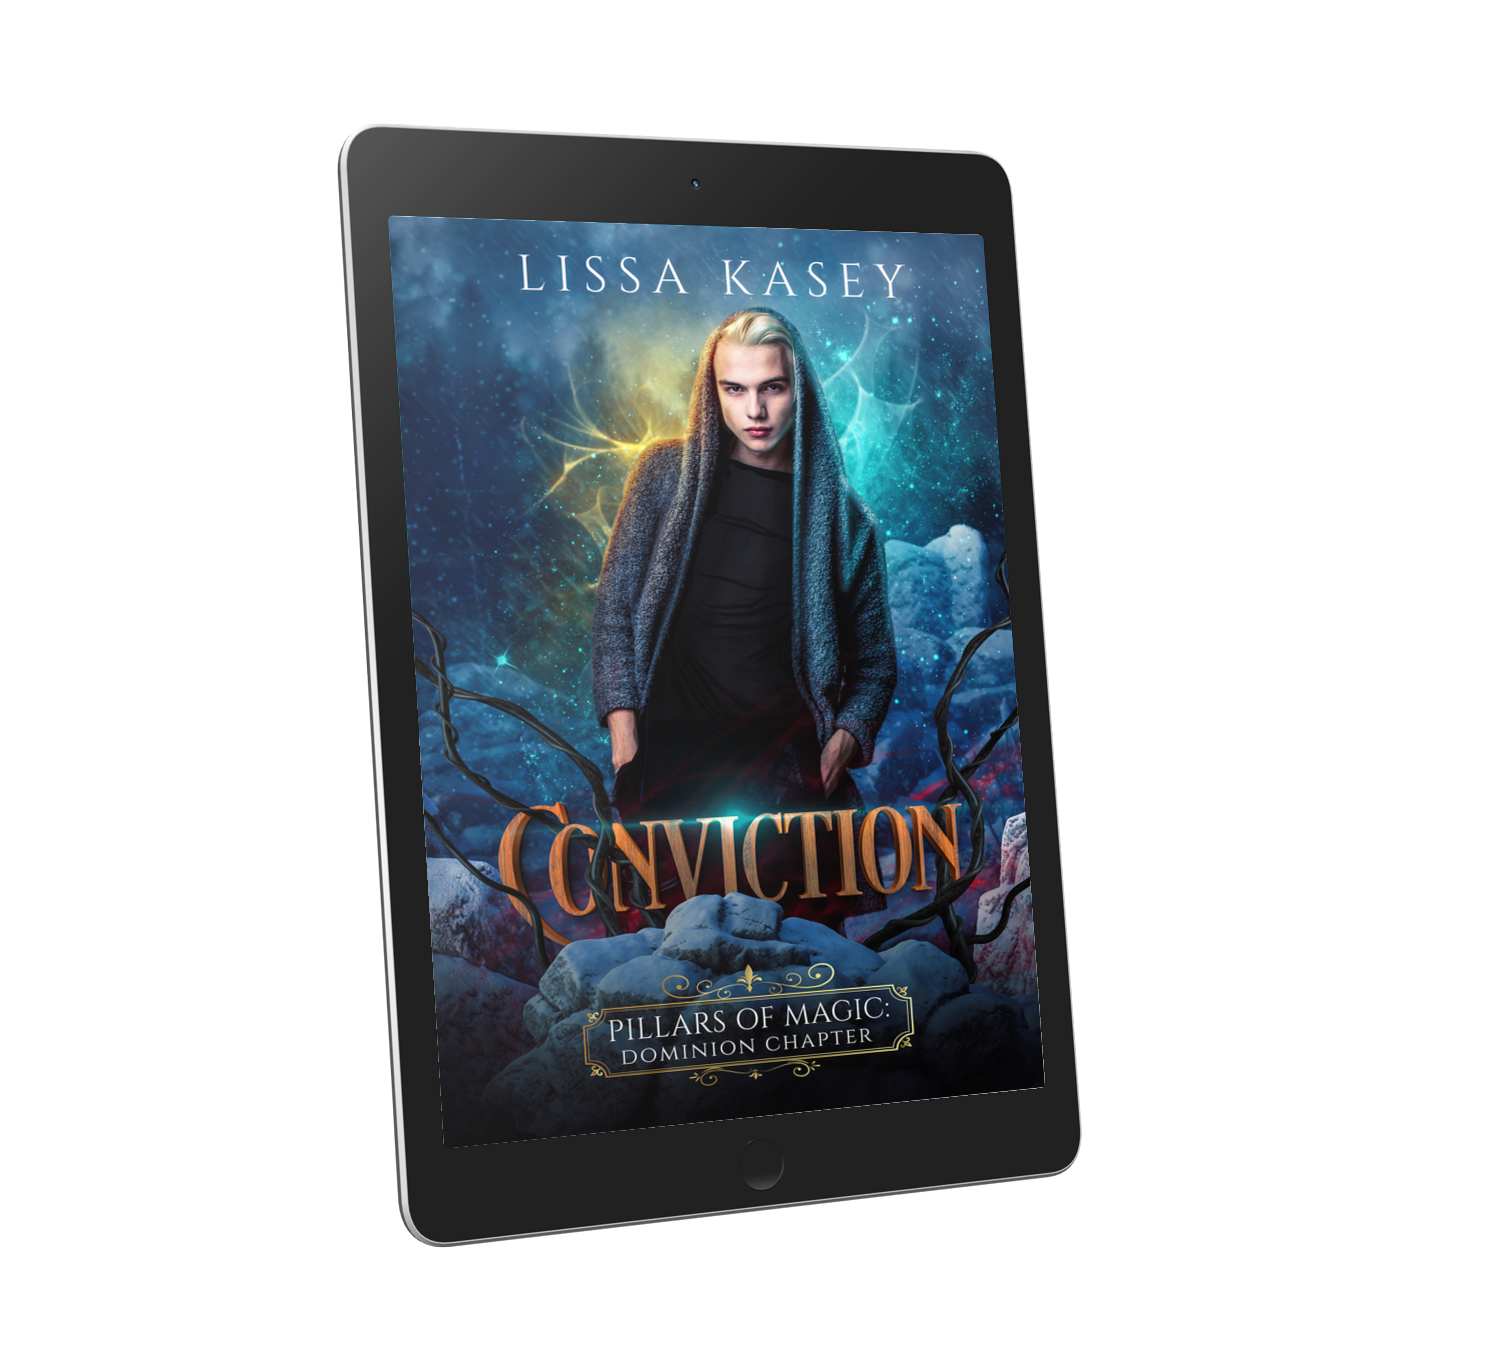 Conviction by Lissa Kasey Pillars of Magic: Dominion Chapter Book Three